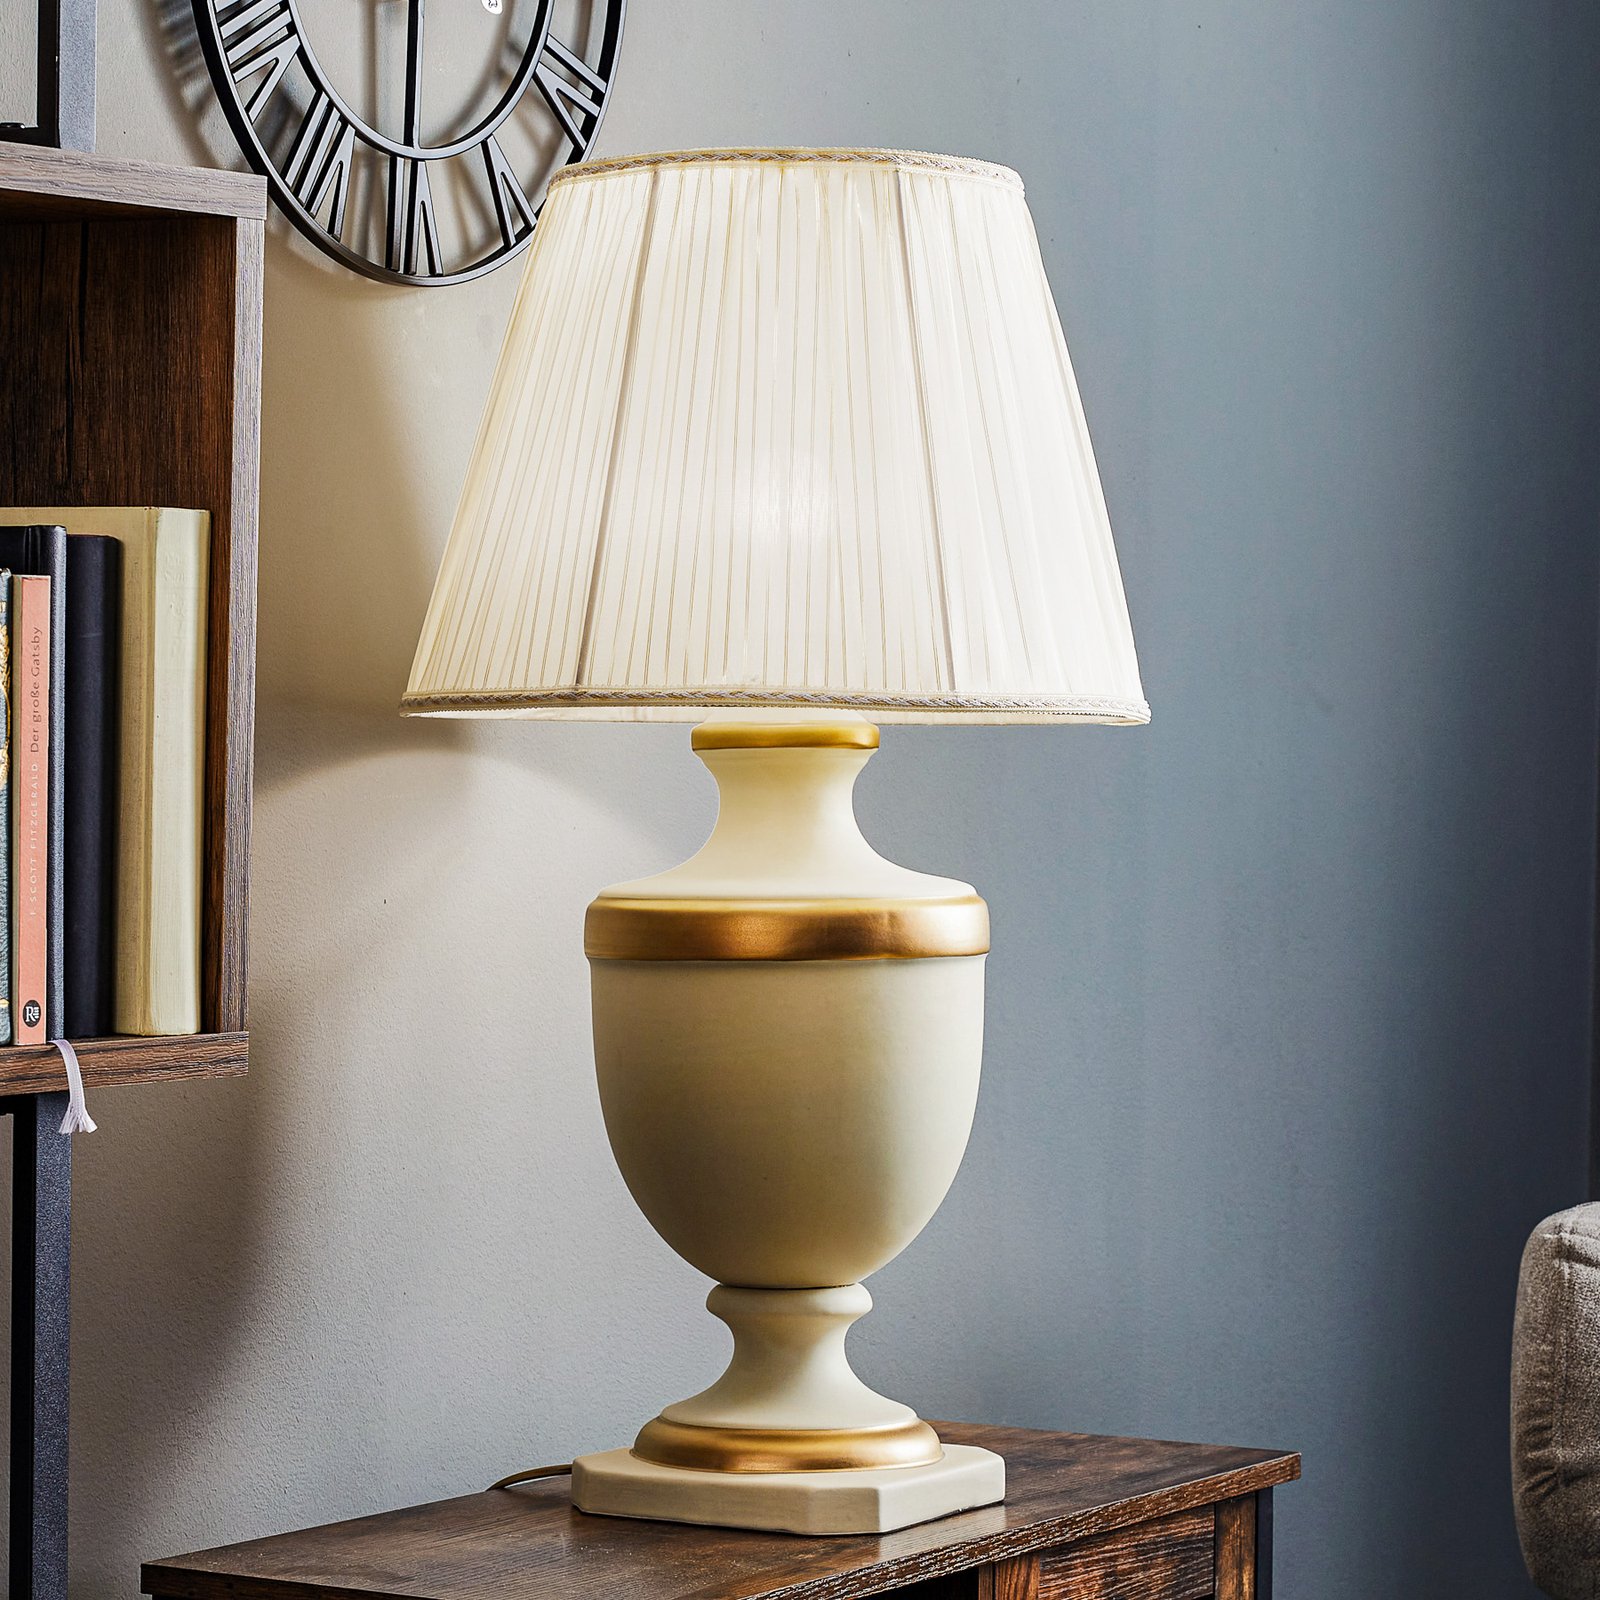 Imperiale table lamp made of ceramics height 66 cm